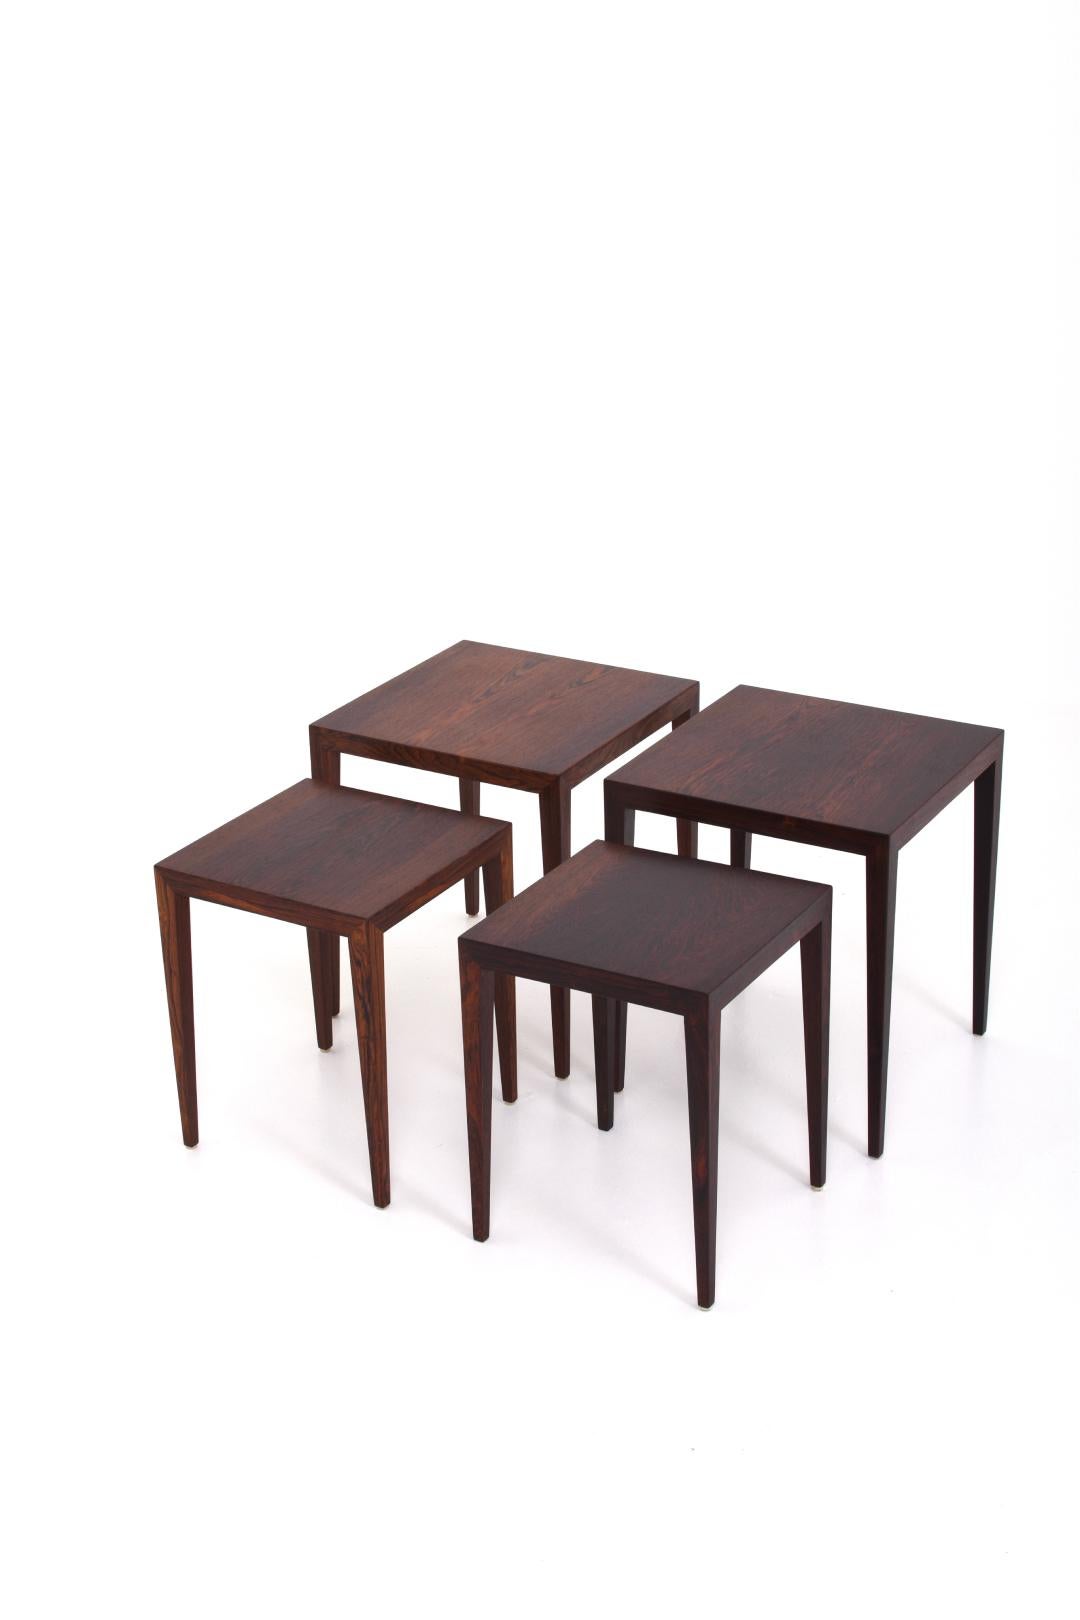 Mid-20th Century Nesting Tables by Severin Hansen for Haslev Møbelsnedkeri 1950s Set of 4